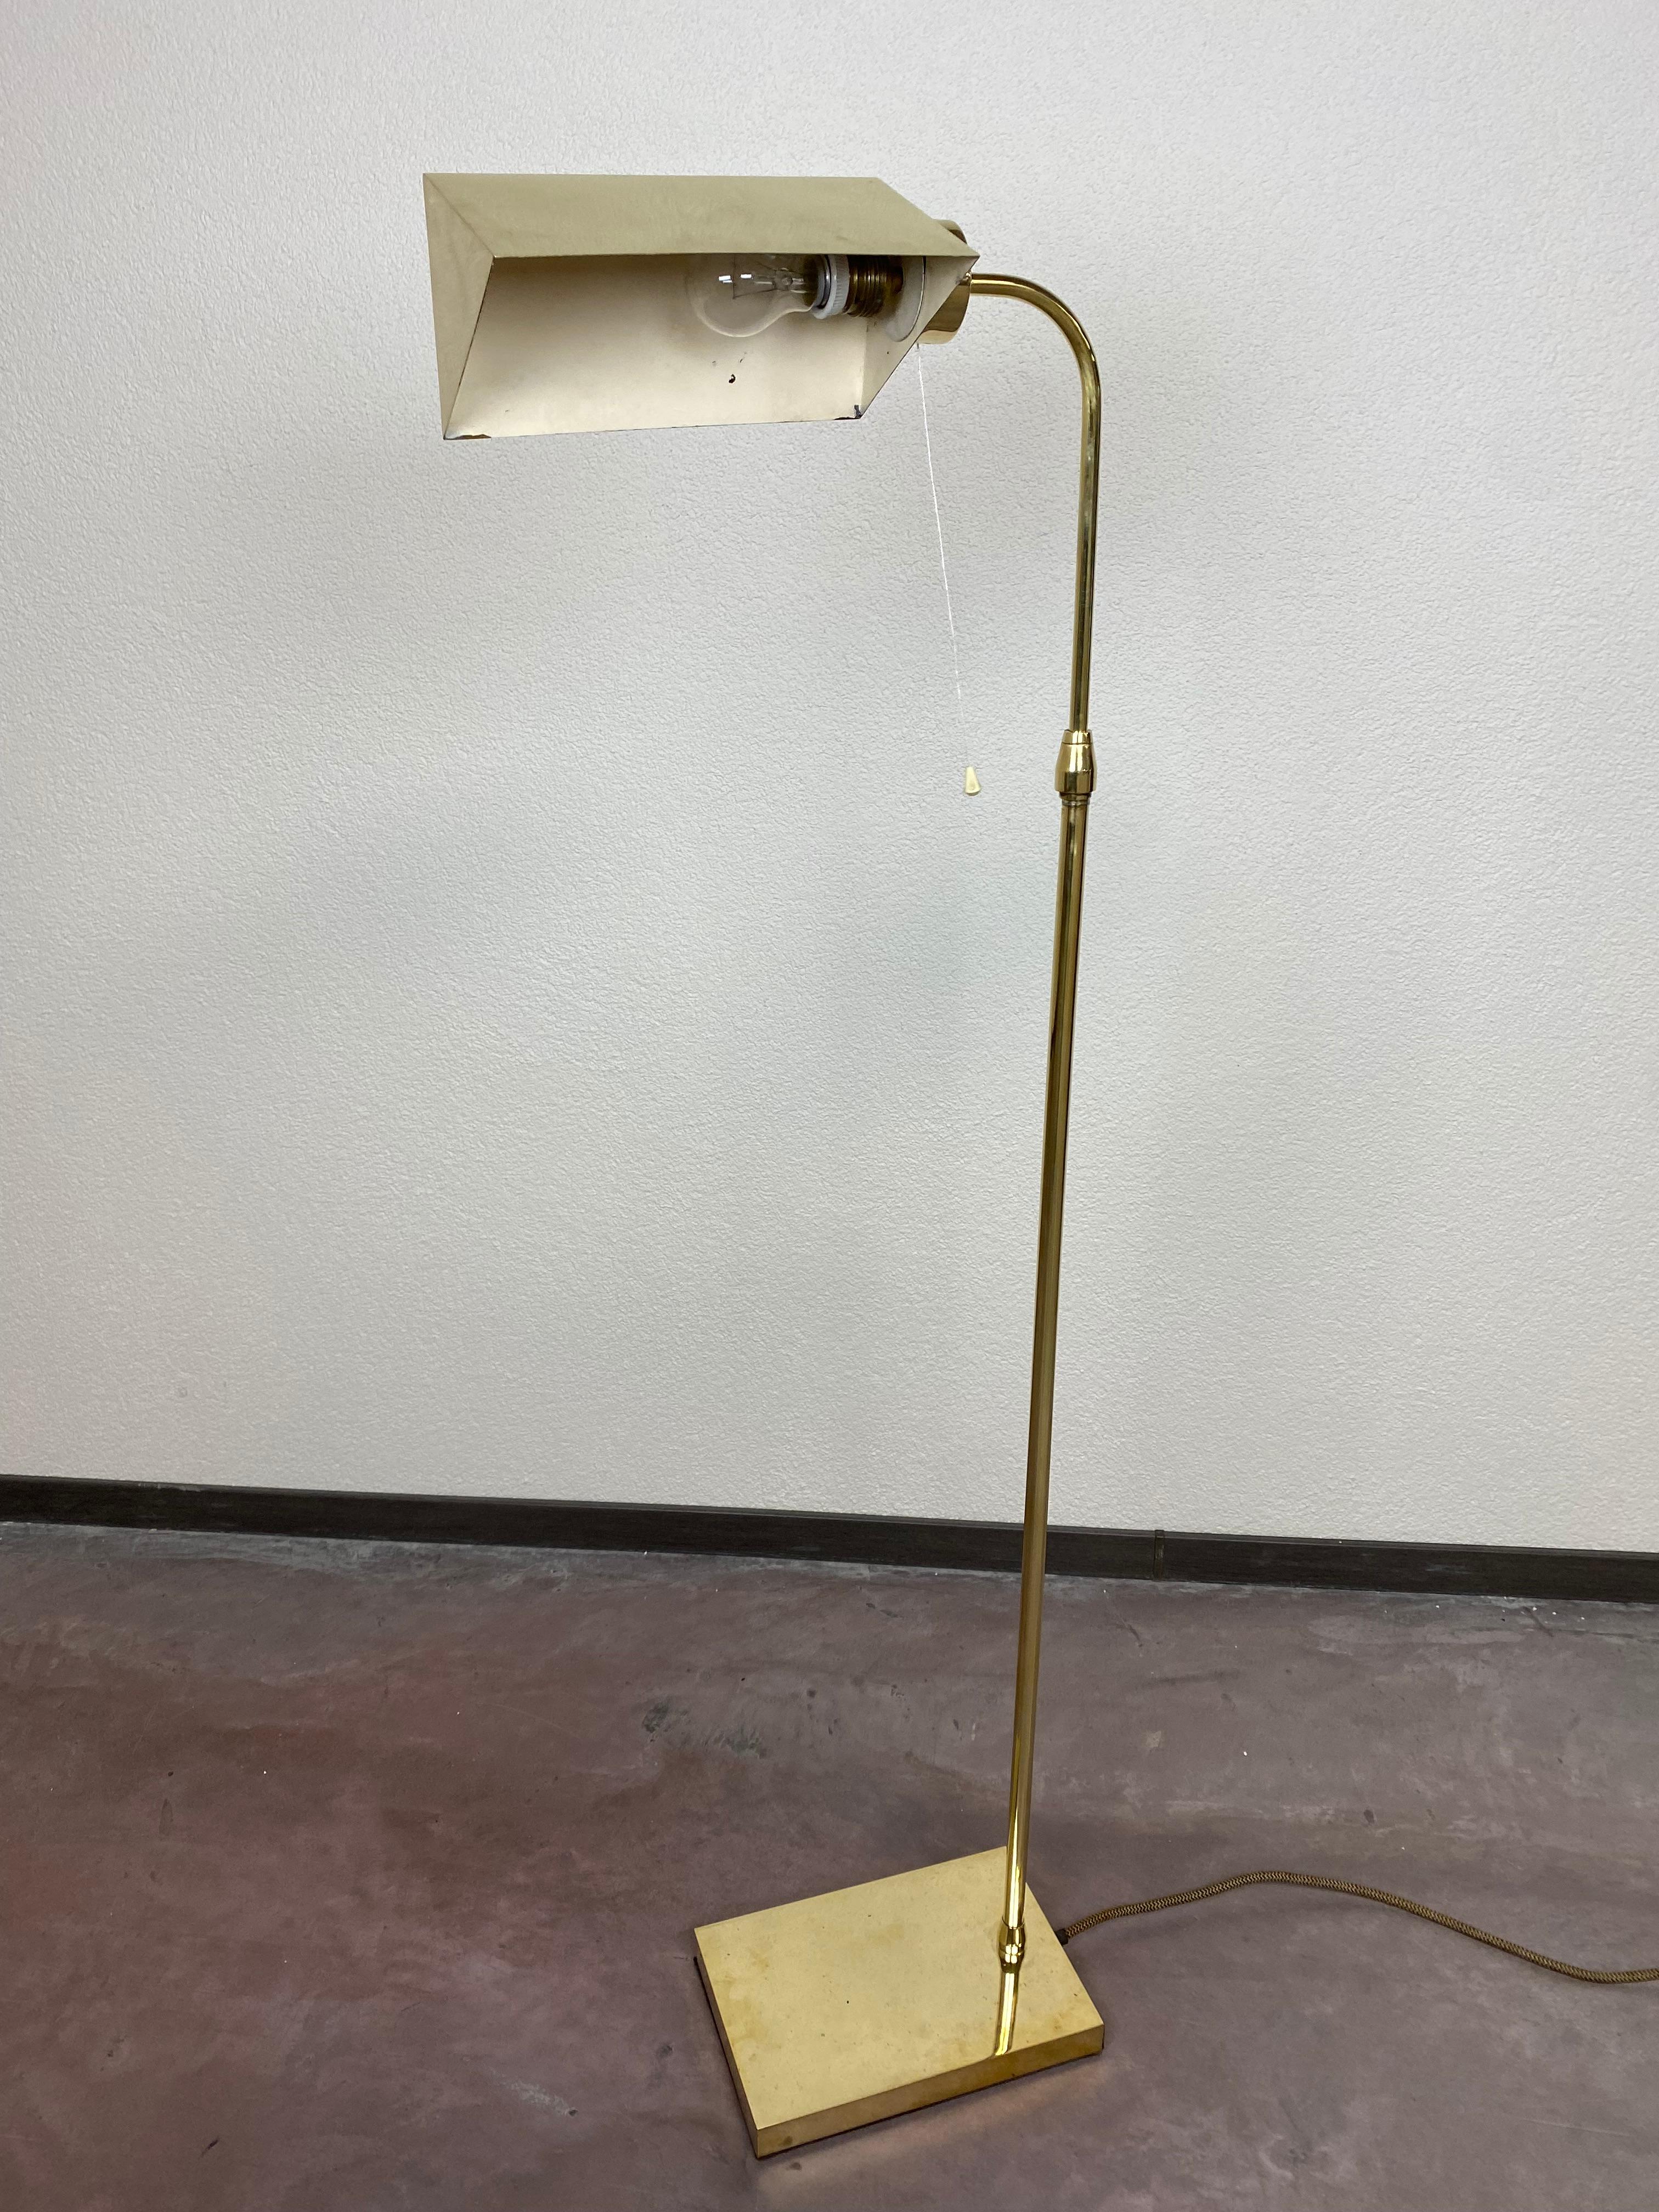 Art deco brass floor lamp by Franta Aníž Prague professionally stained and repolished.